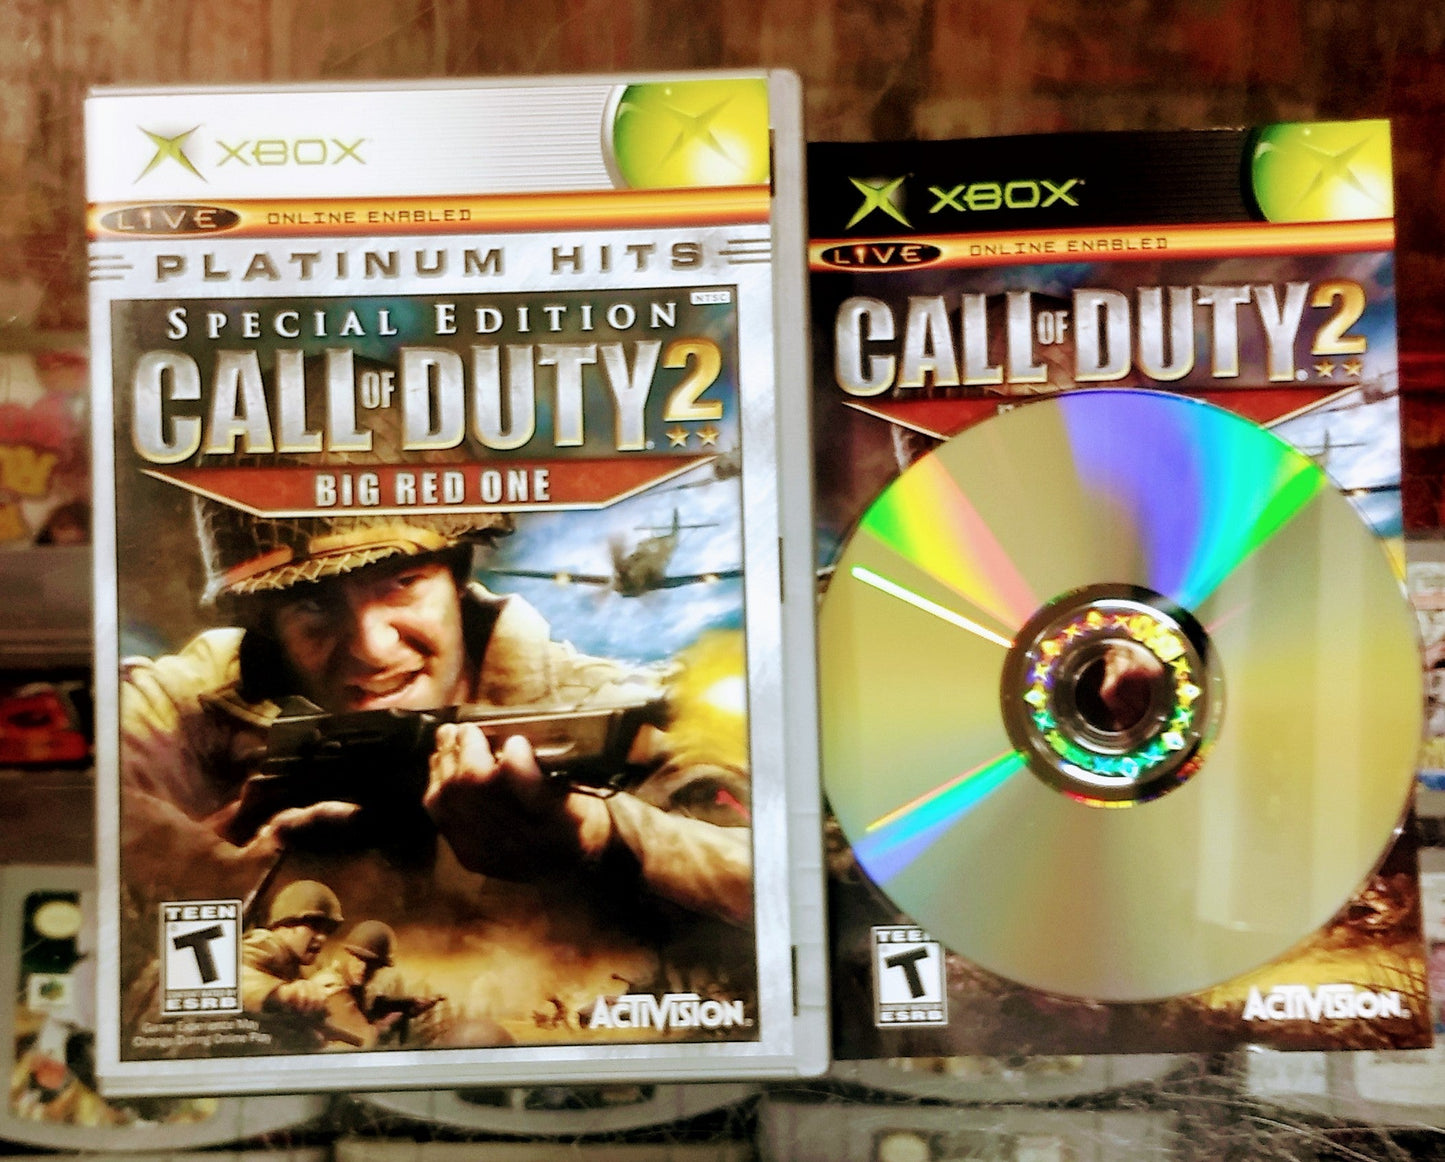 CALL OF DUTY 2 BIG RED ONE SPECIAL EDITION PLATINUM HITS (XBOX) - jeux video game-x